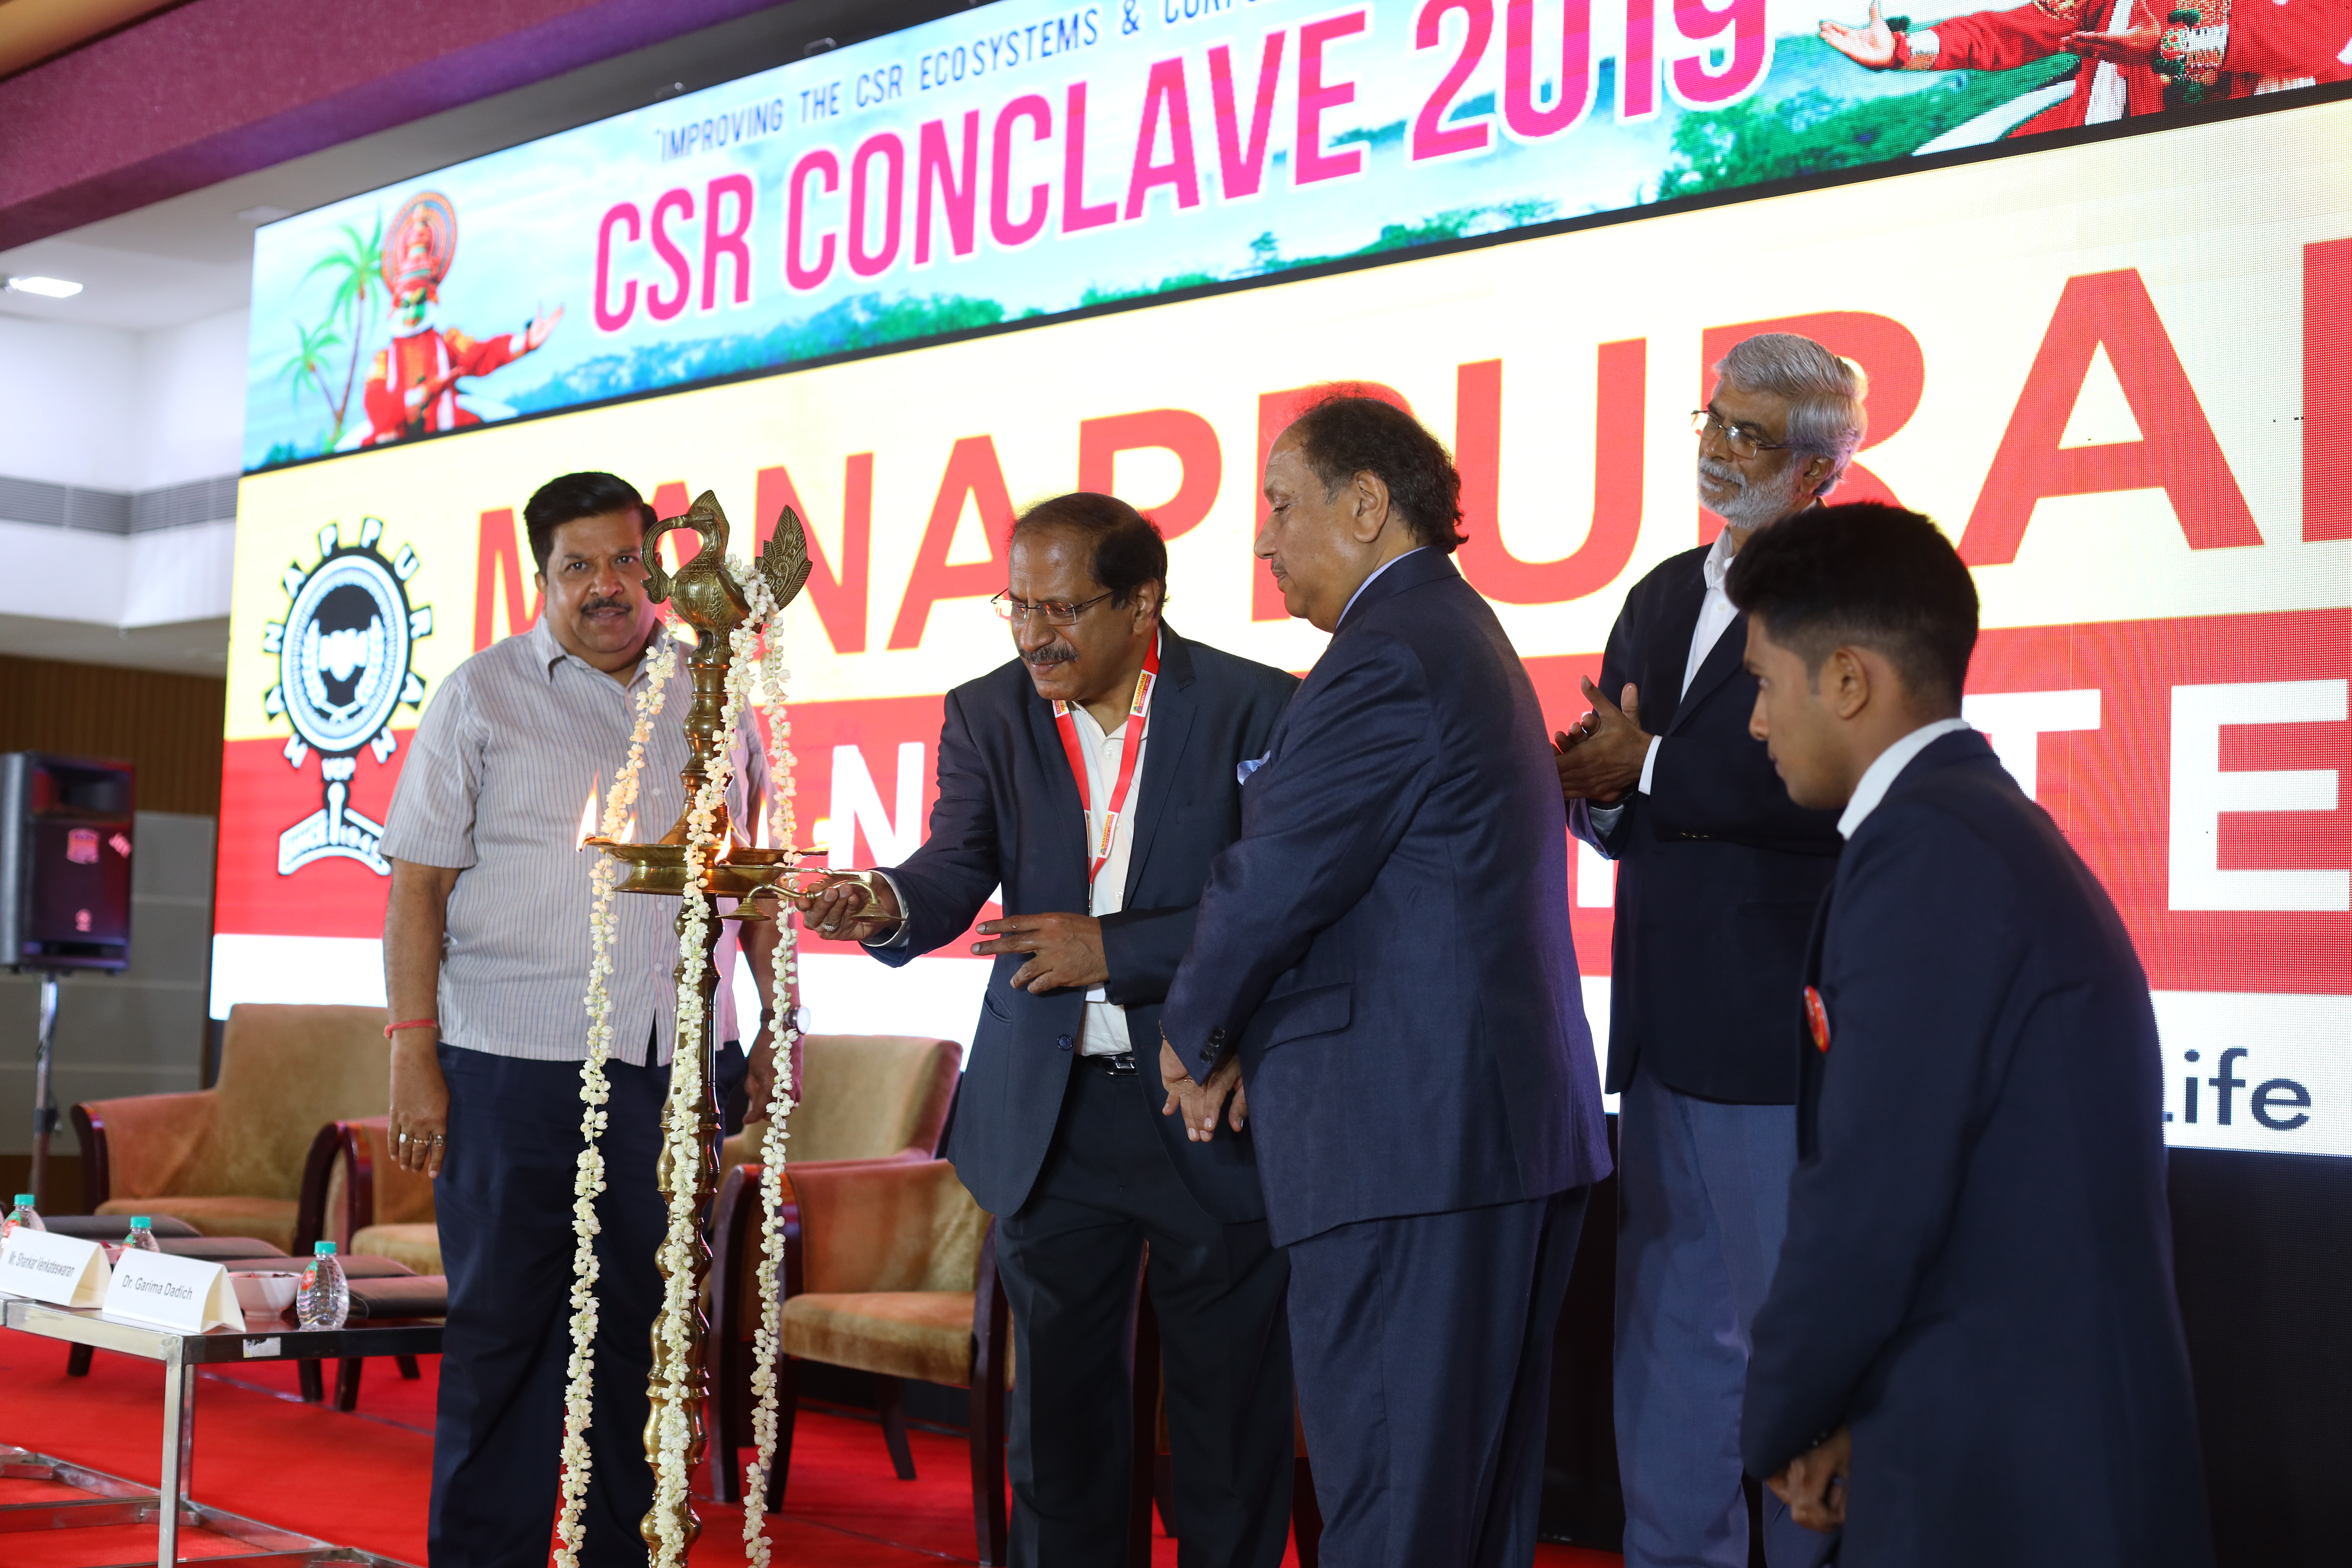 IICA hosts 2nd edition of CSR Conclave at Kochi Read more: http://uniquetimes.org/iica-hosts-2nd-edition-of-csr-conclave-at-kochi/#ixzz5hTqZNUI4